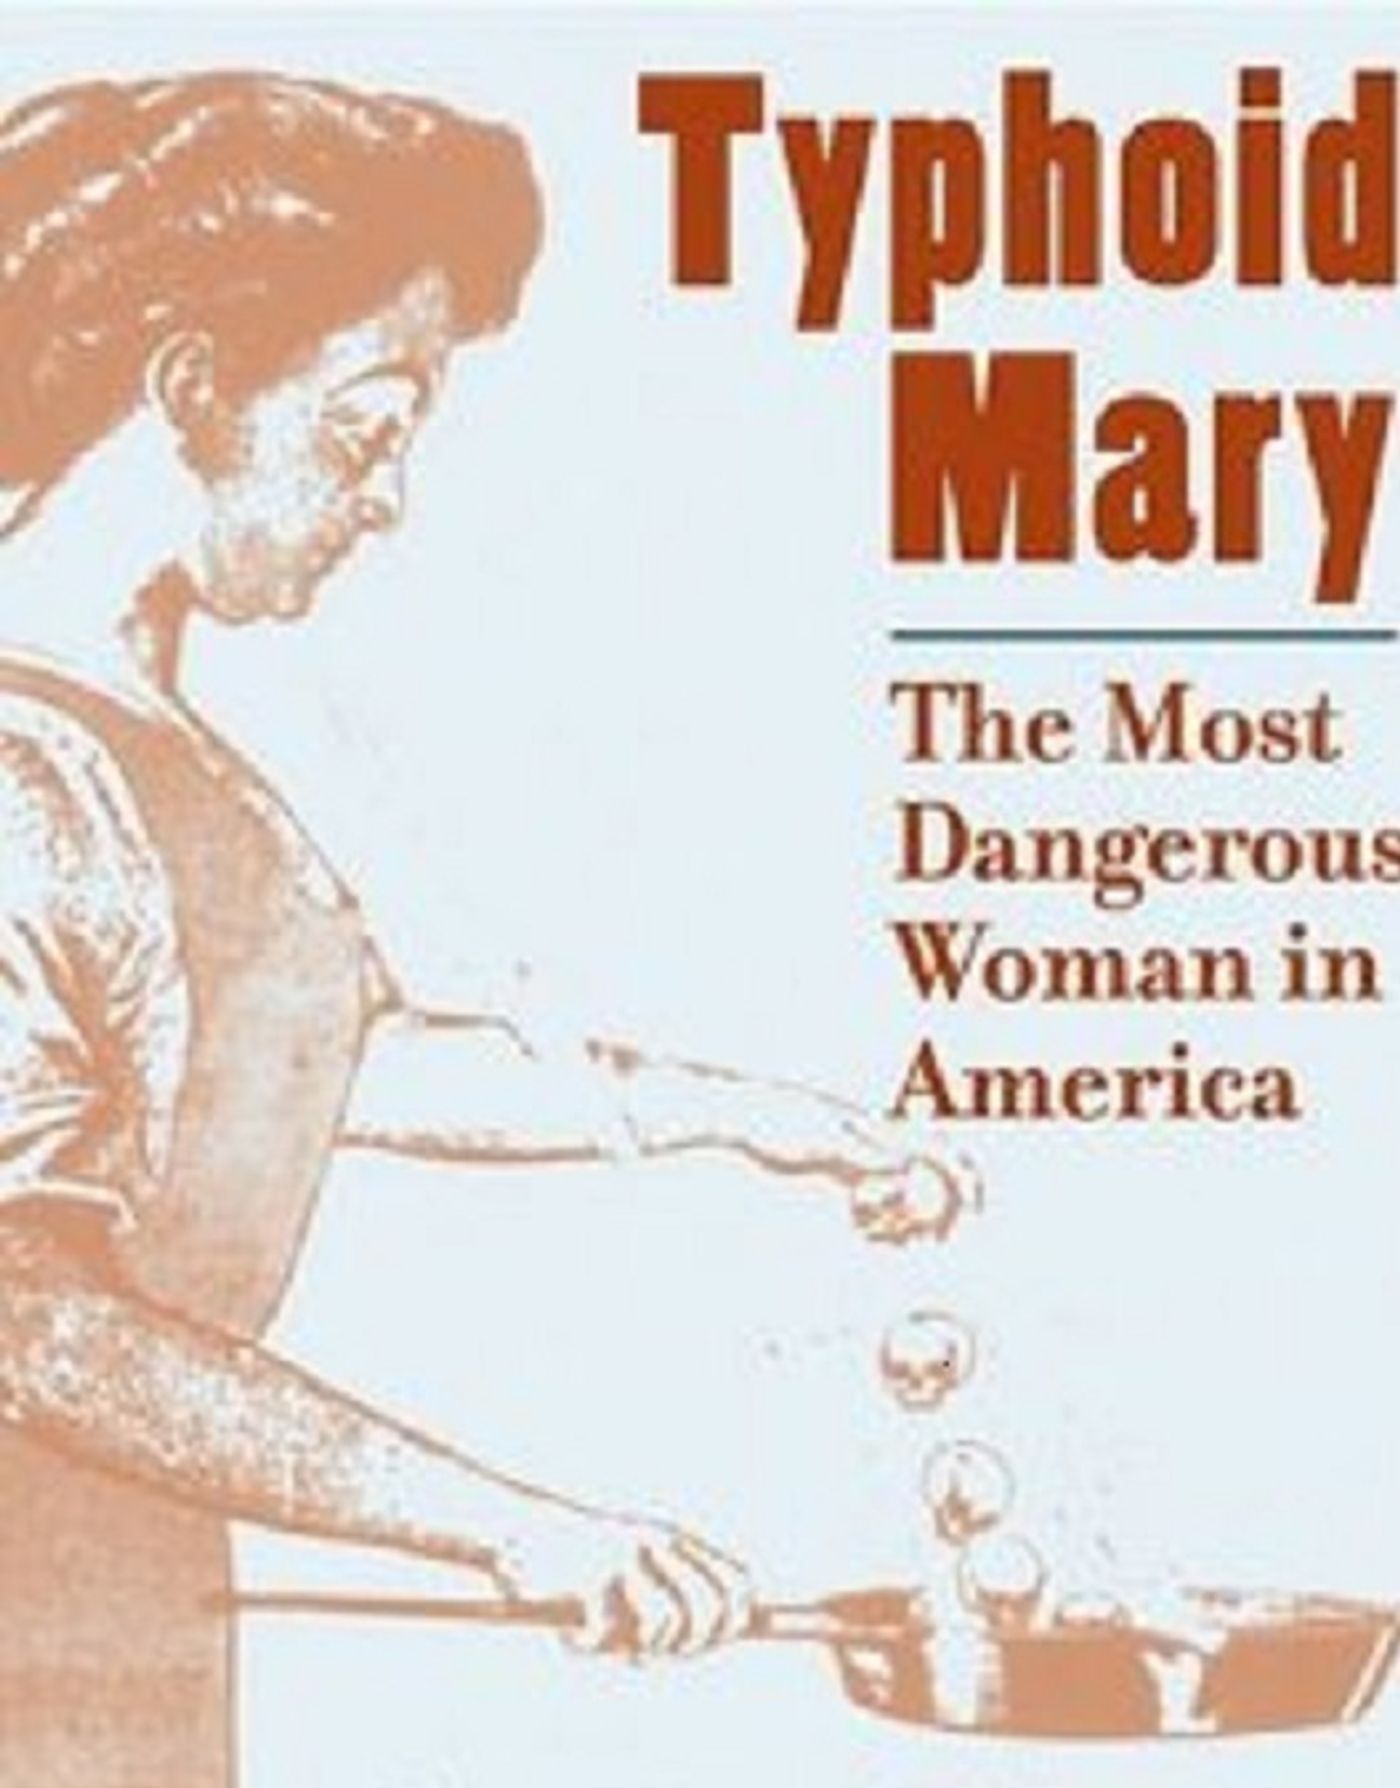 Mary Mallon, also known as Typhoid Mary, was a cook in the early 1900s who infected over 50 people with S. Typhi.